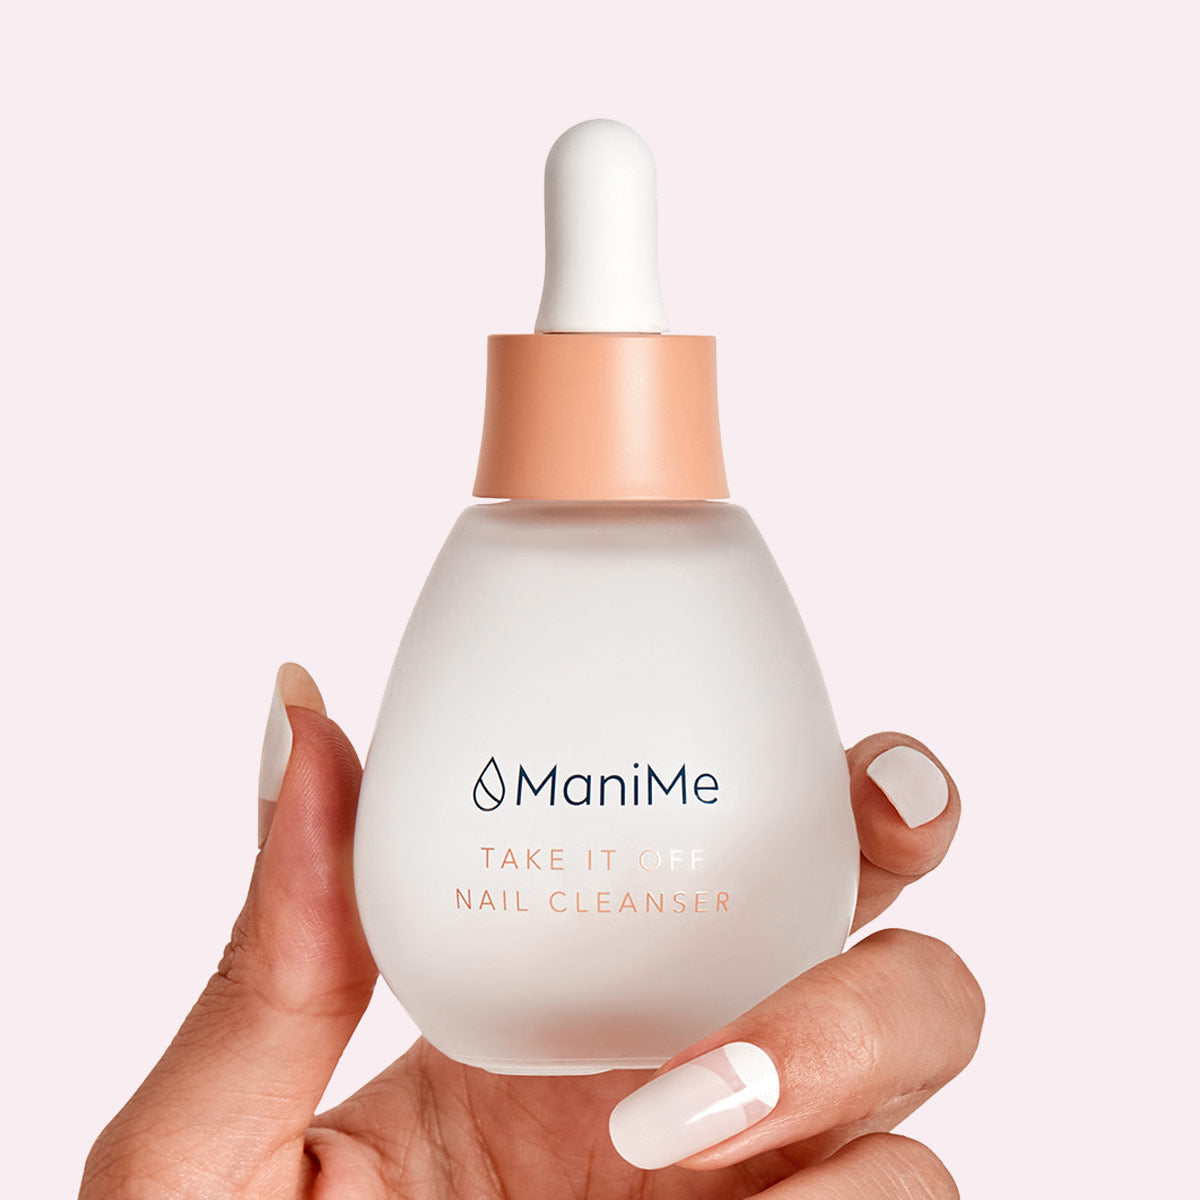 Take It Off Nail Cleanser